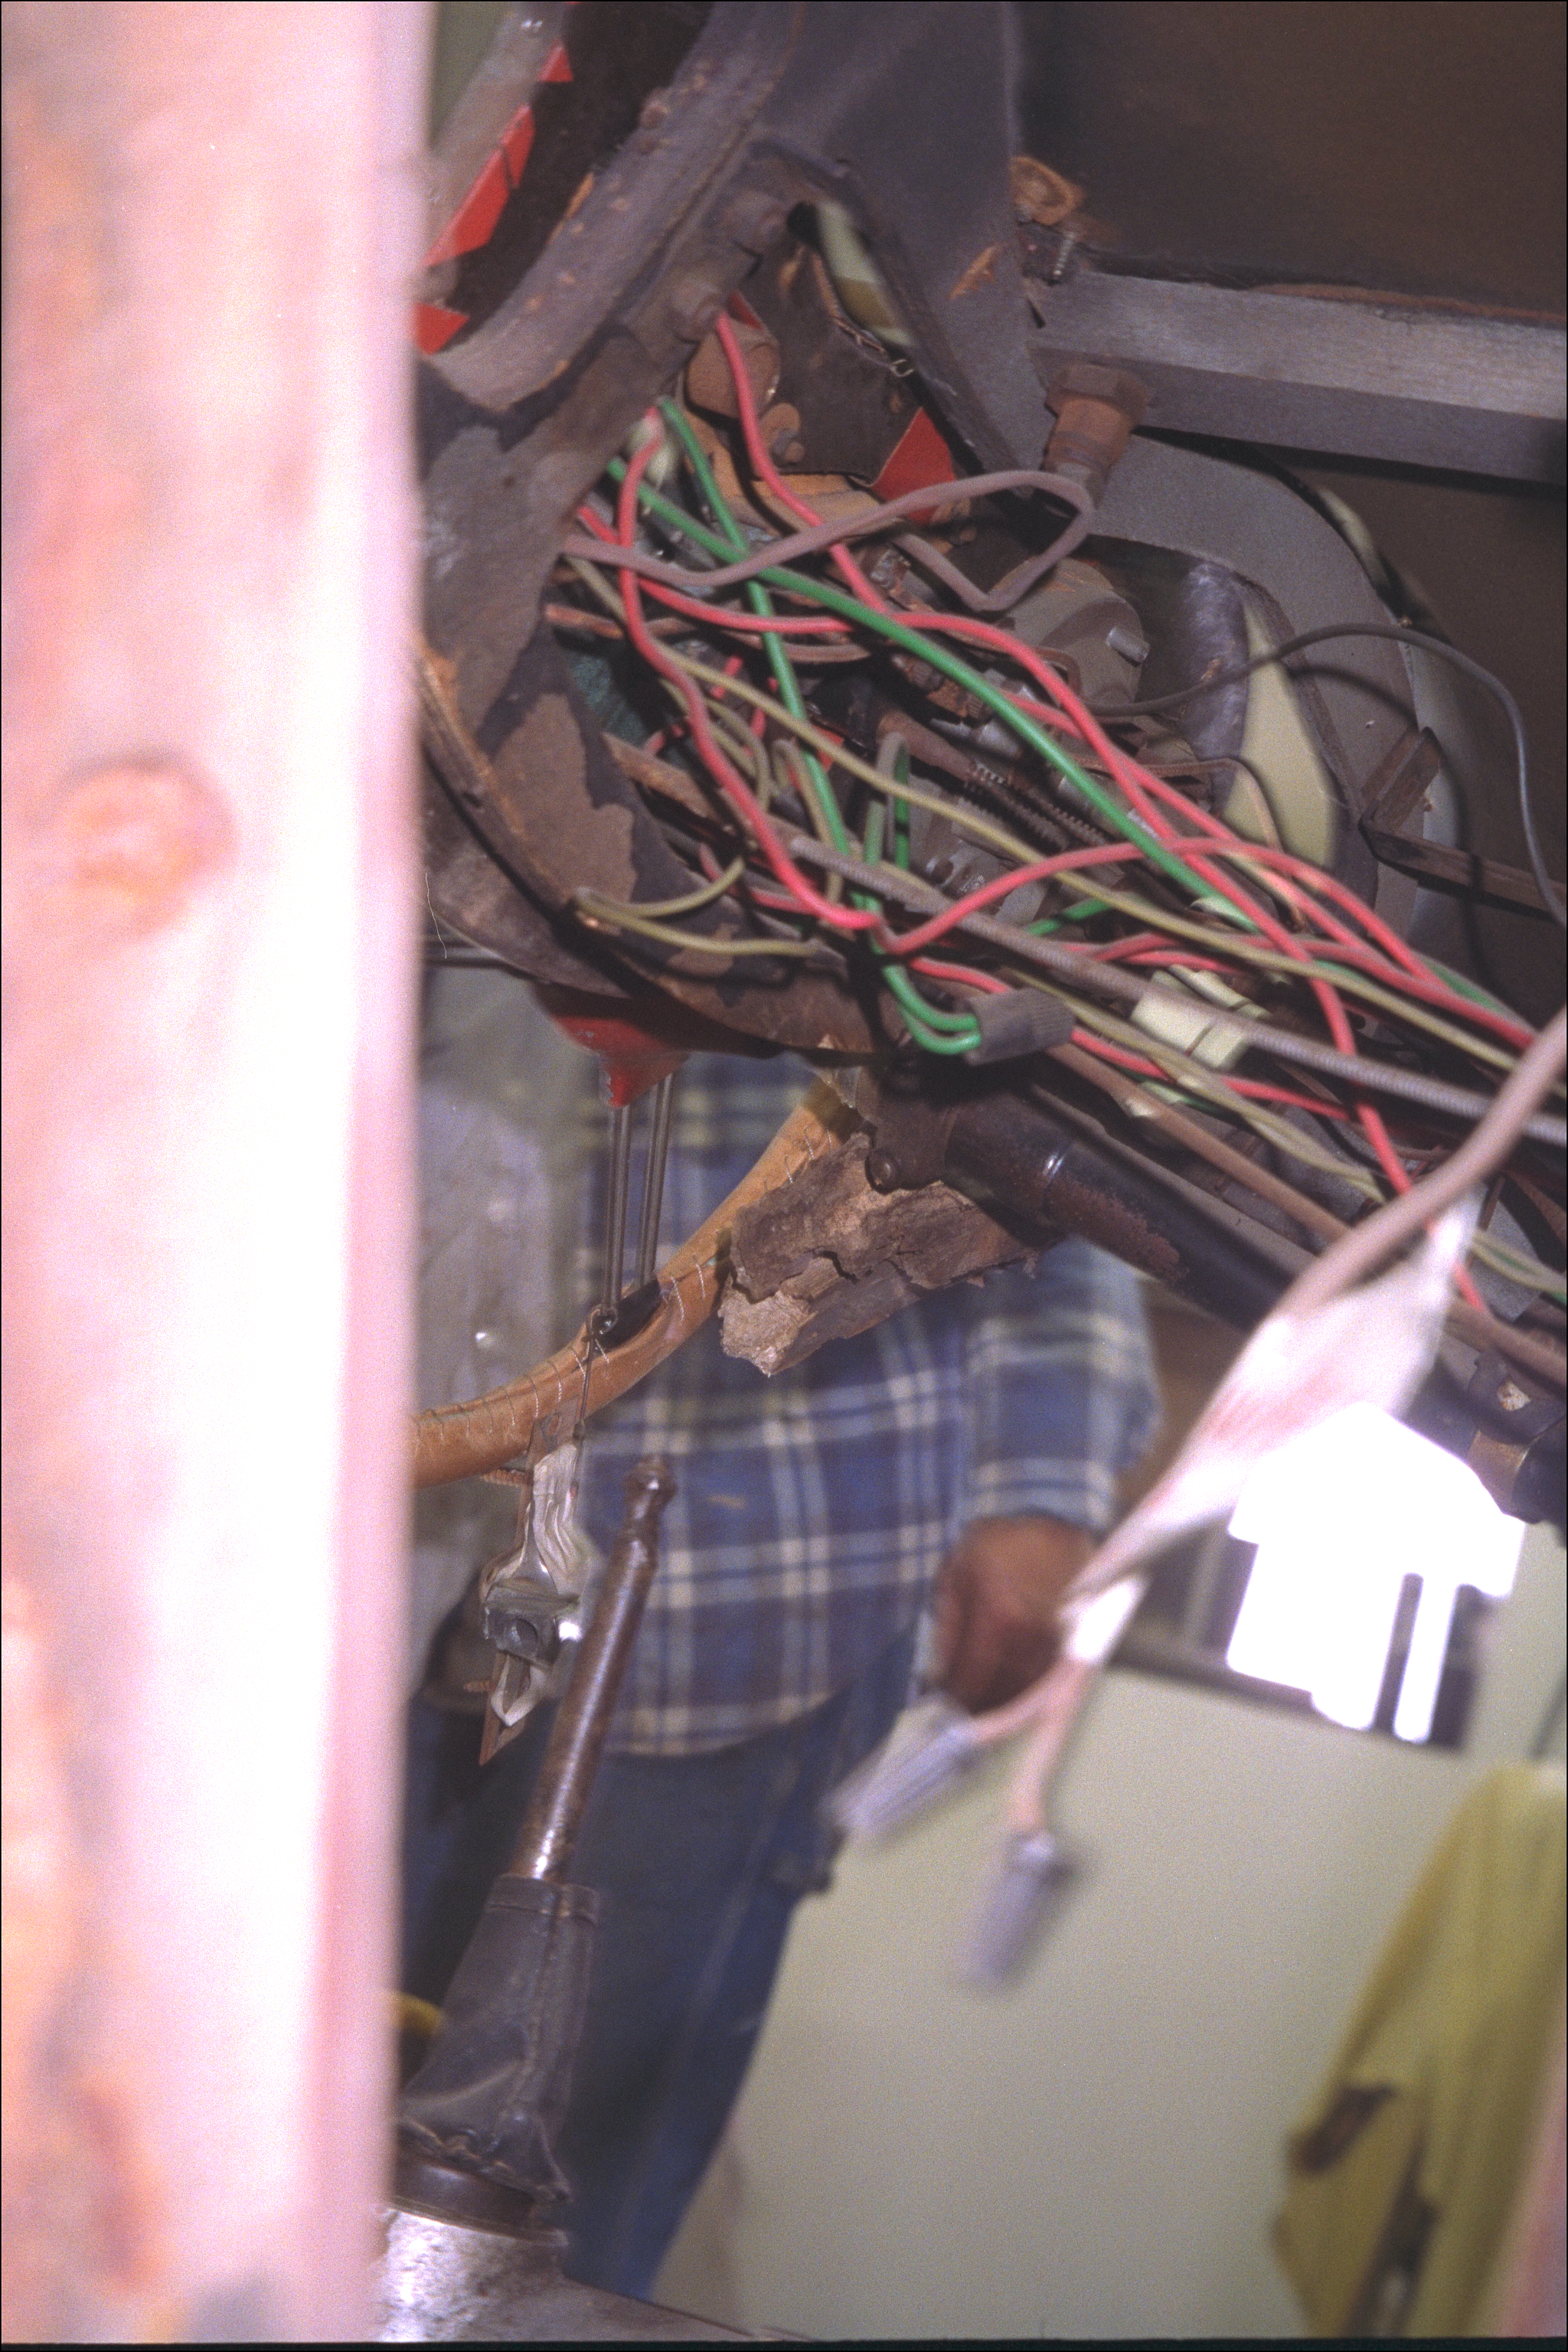 Wiring under the cowl